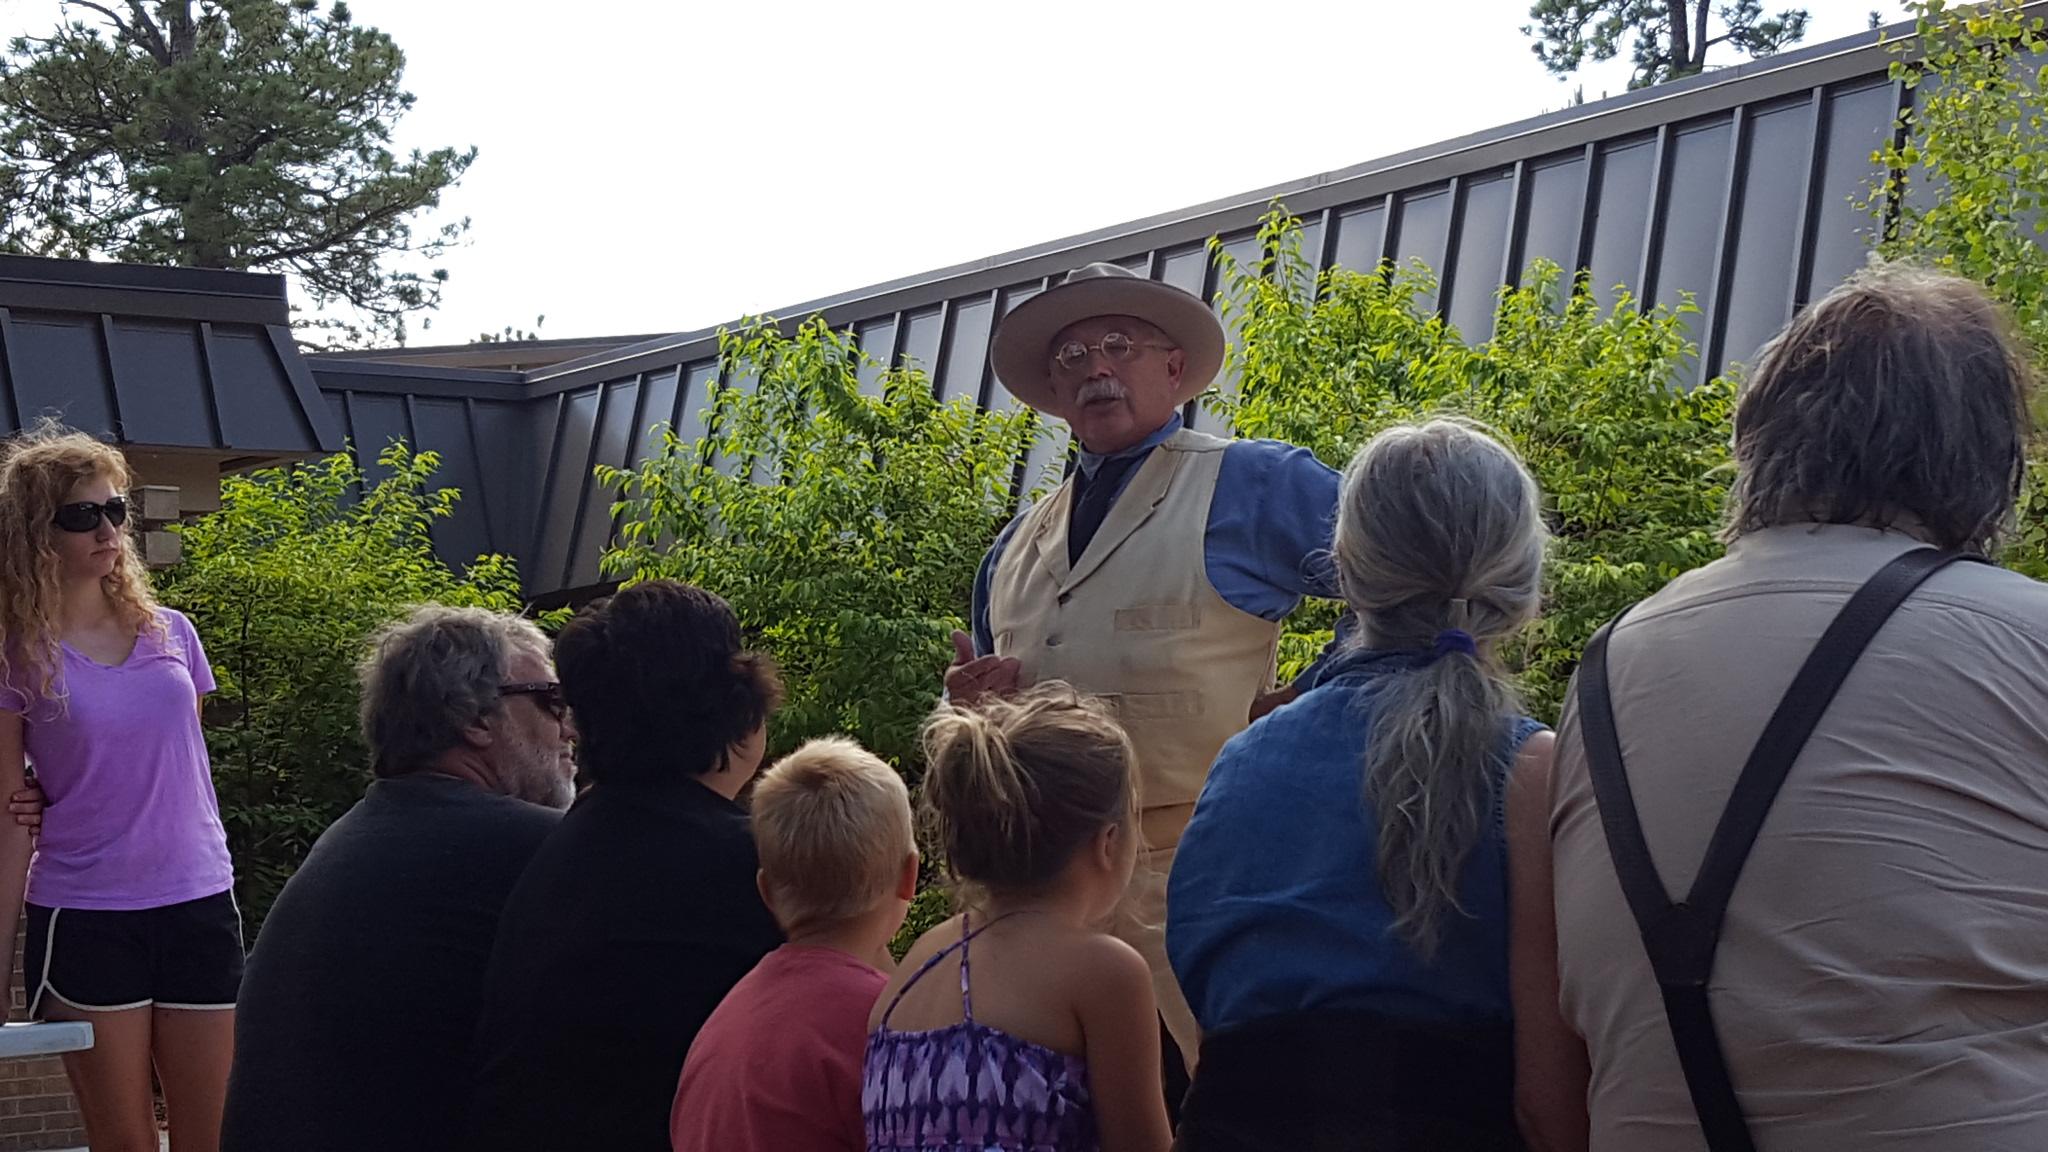 A look-alike Theodore Roosevelt speaks to visitors on the patio of the visitor center.